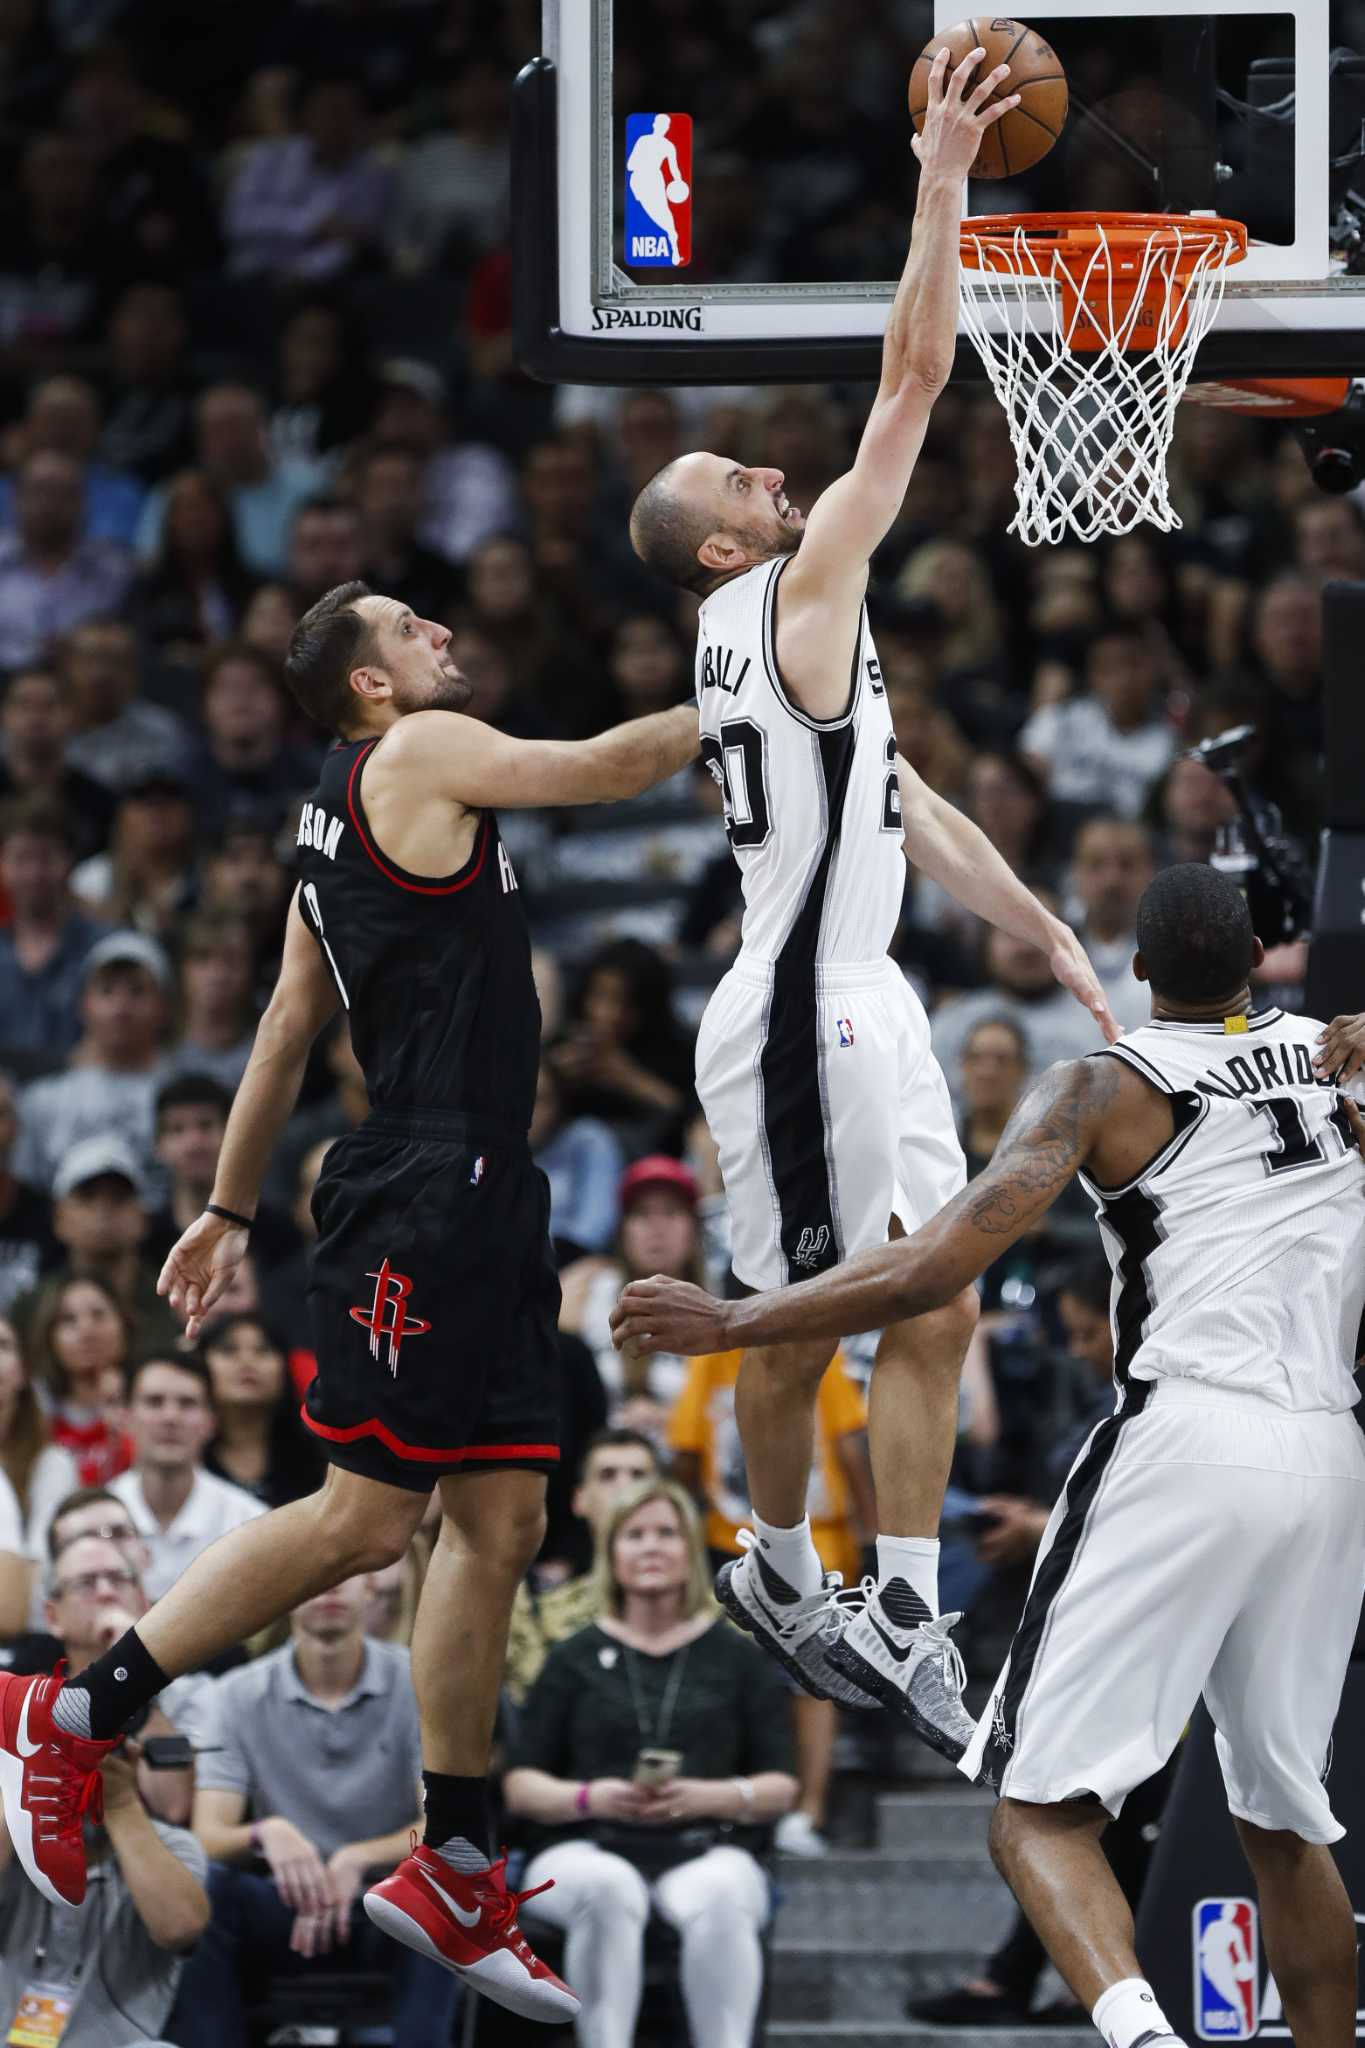 Spurs' Manu Ginobili relies on instincts to defend final play - Houston Chronicle